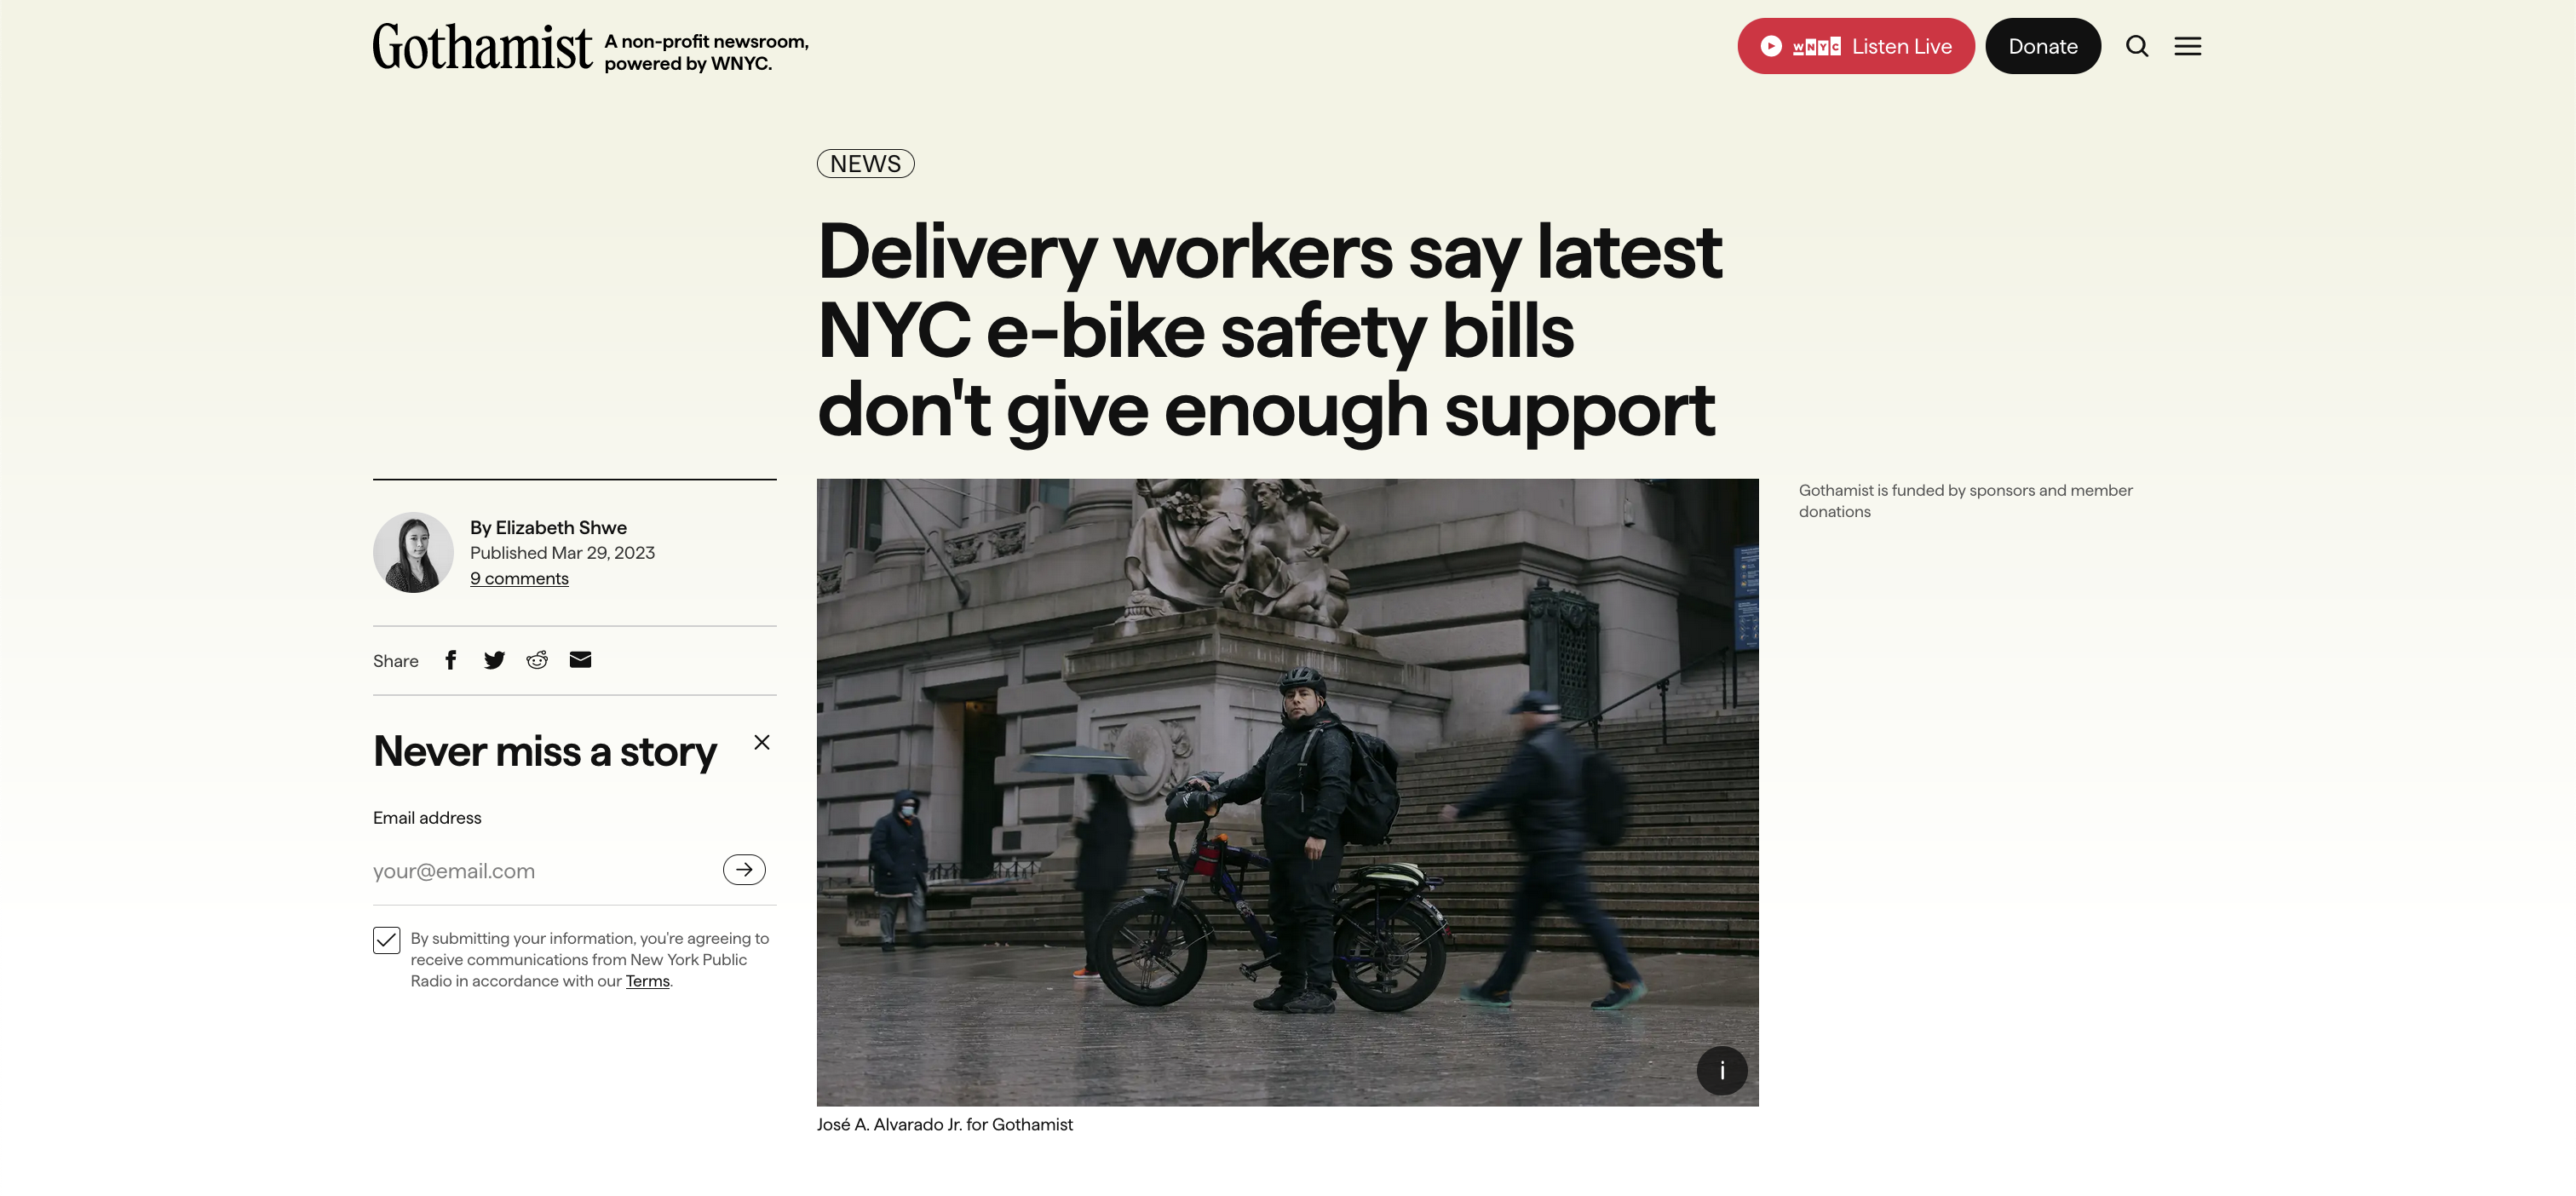 for Gothamist: Delivery workers say latest NYC e-bike safety bills don't give enough support